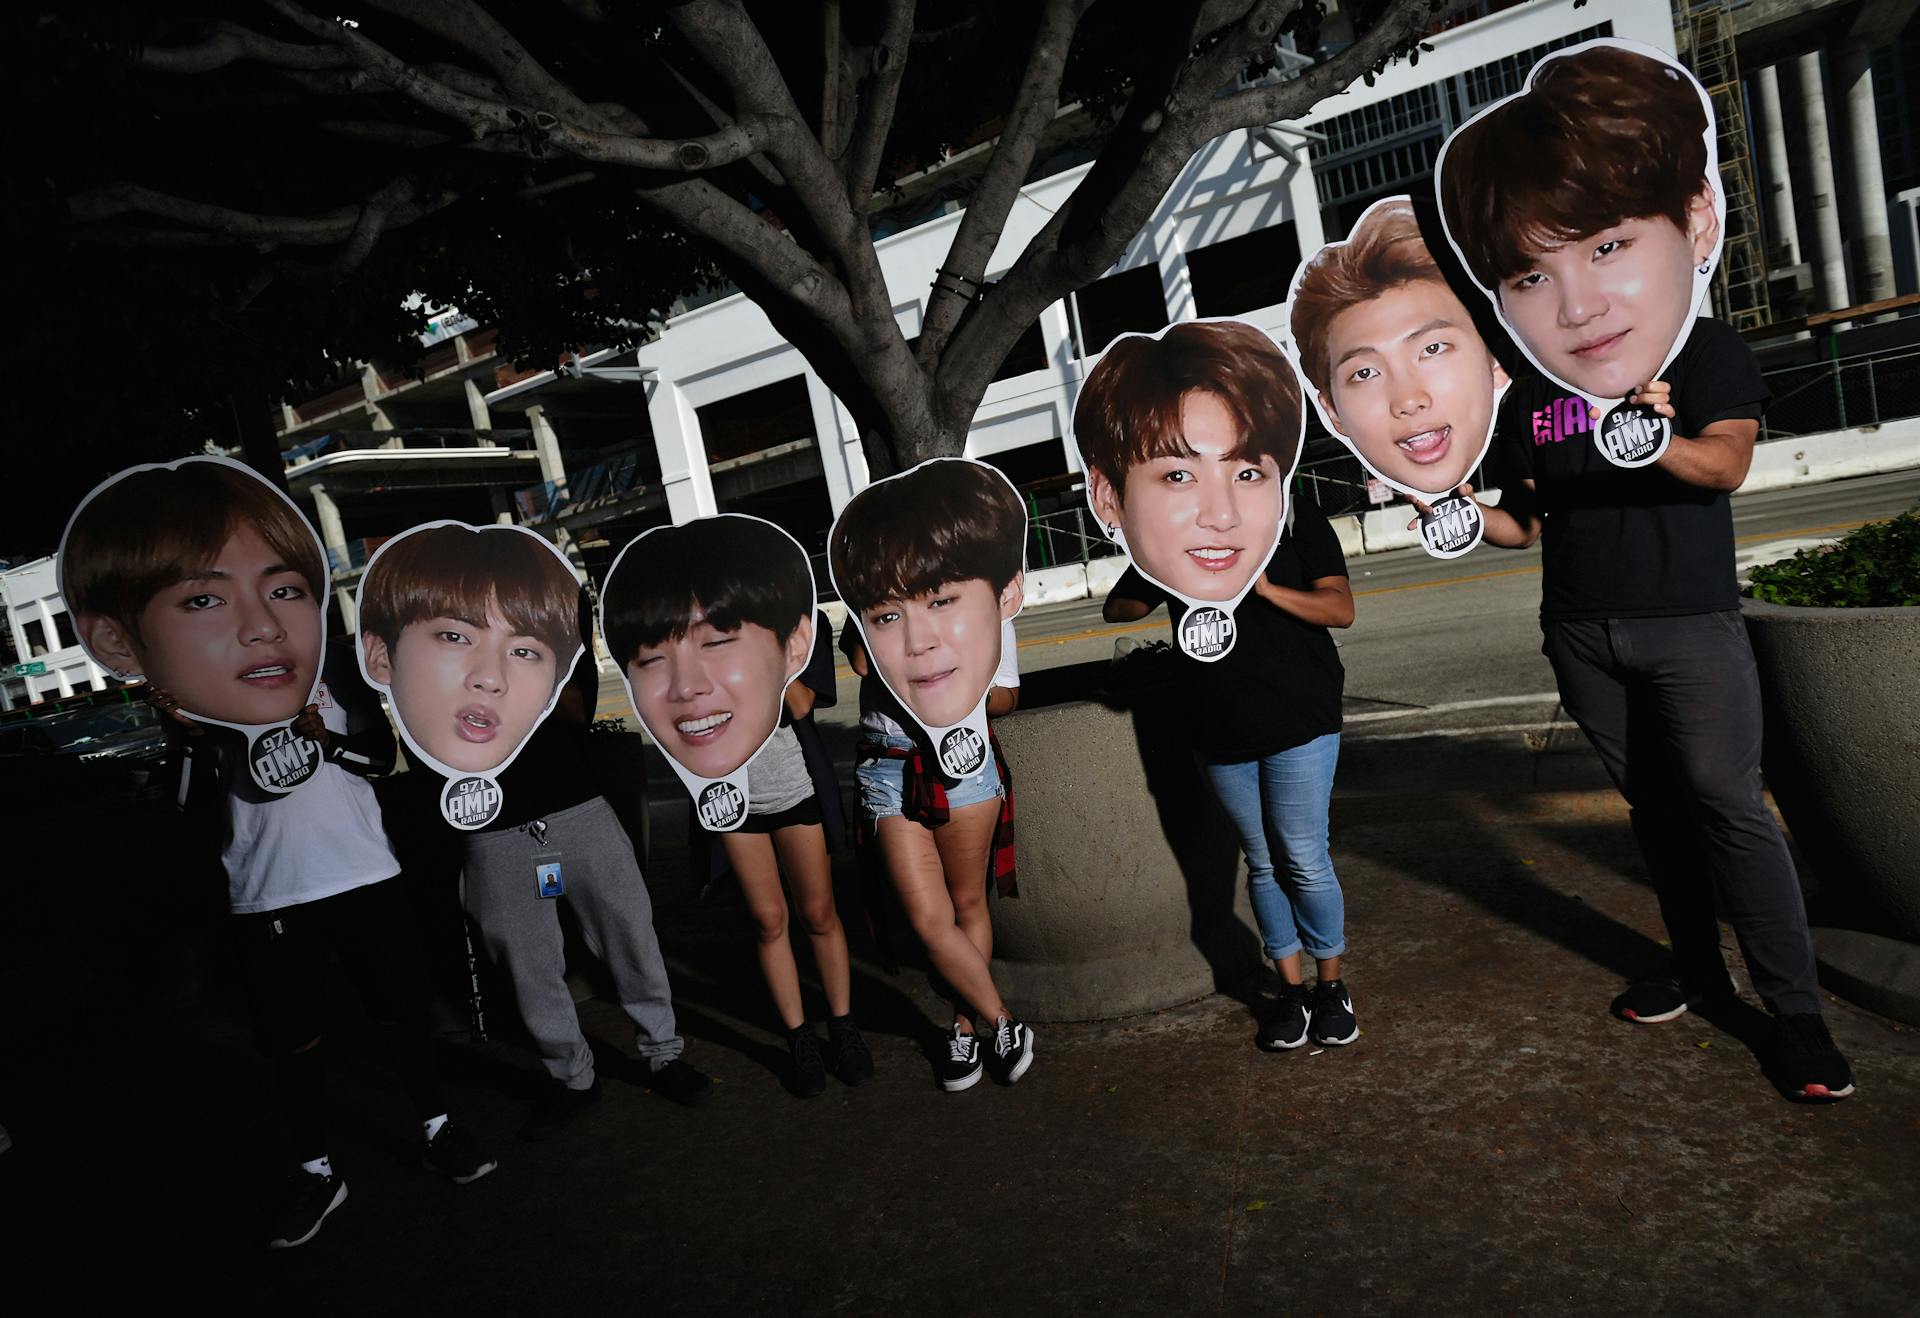 K-pop fans supporting their idols with signs.